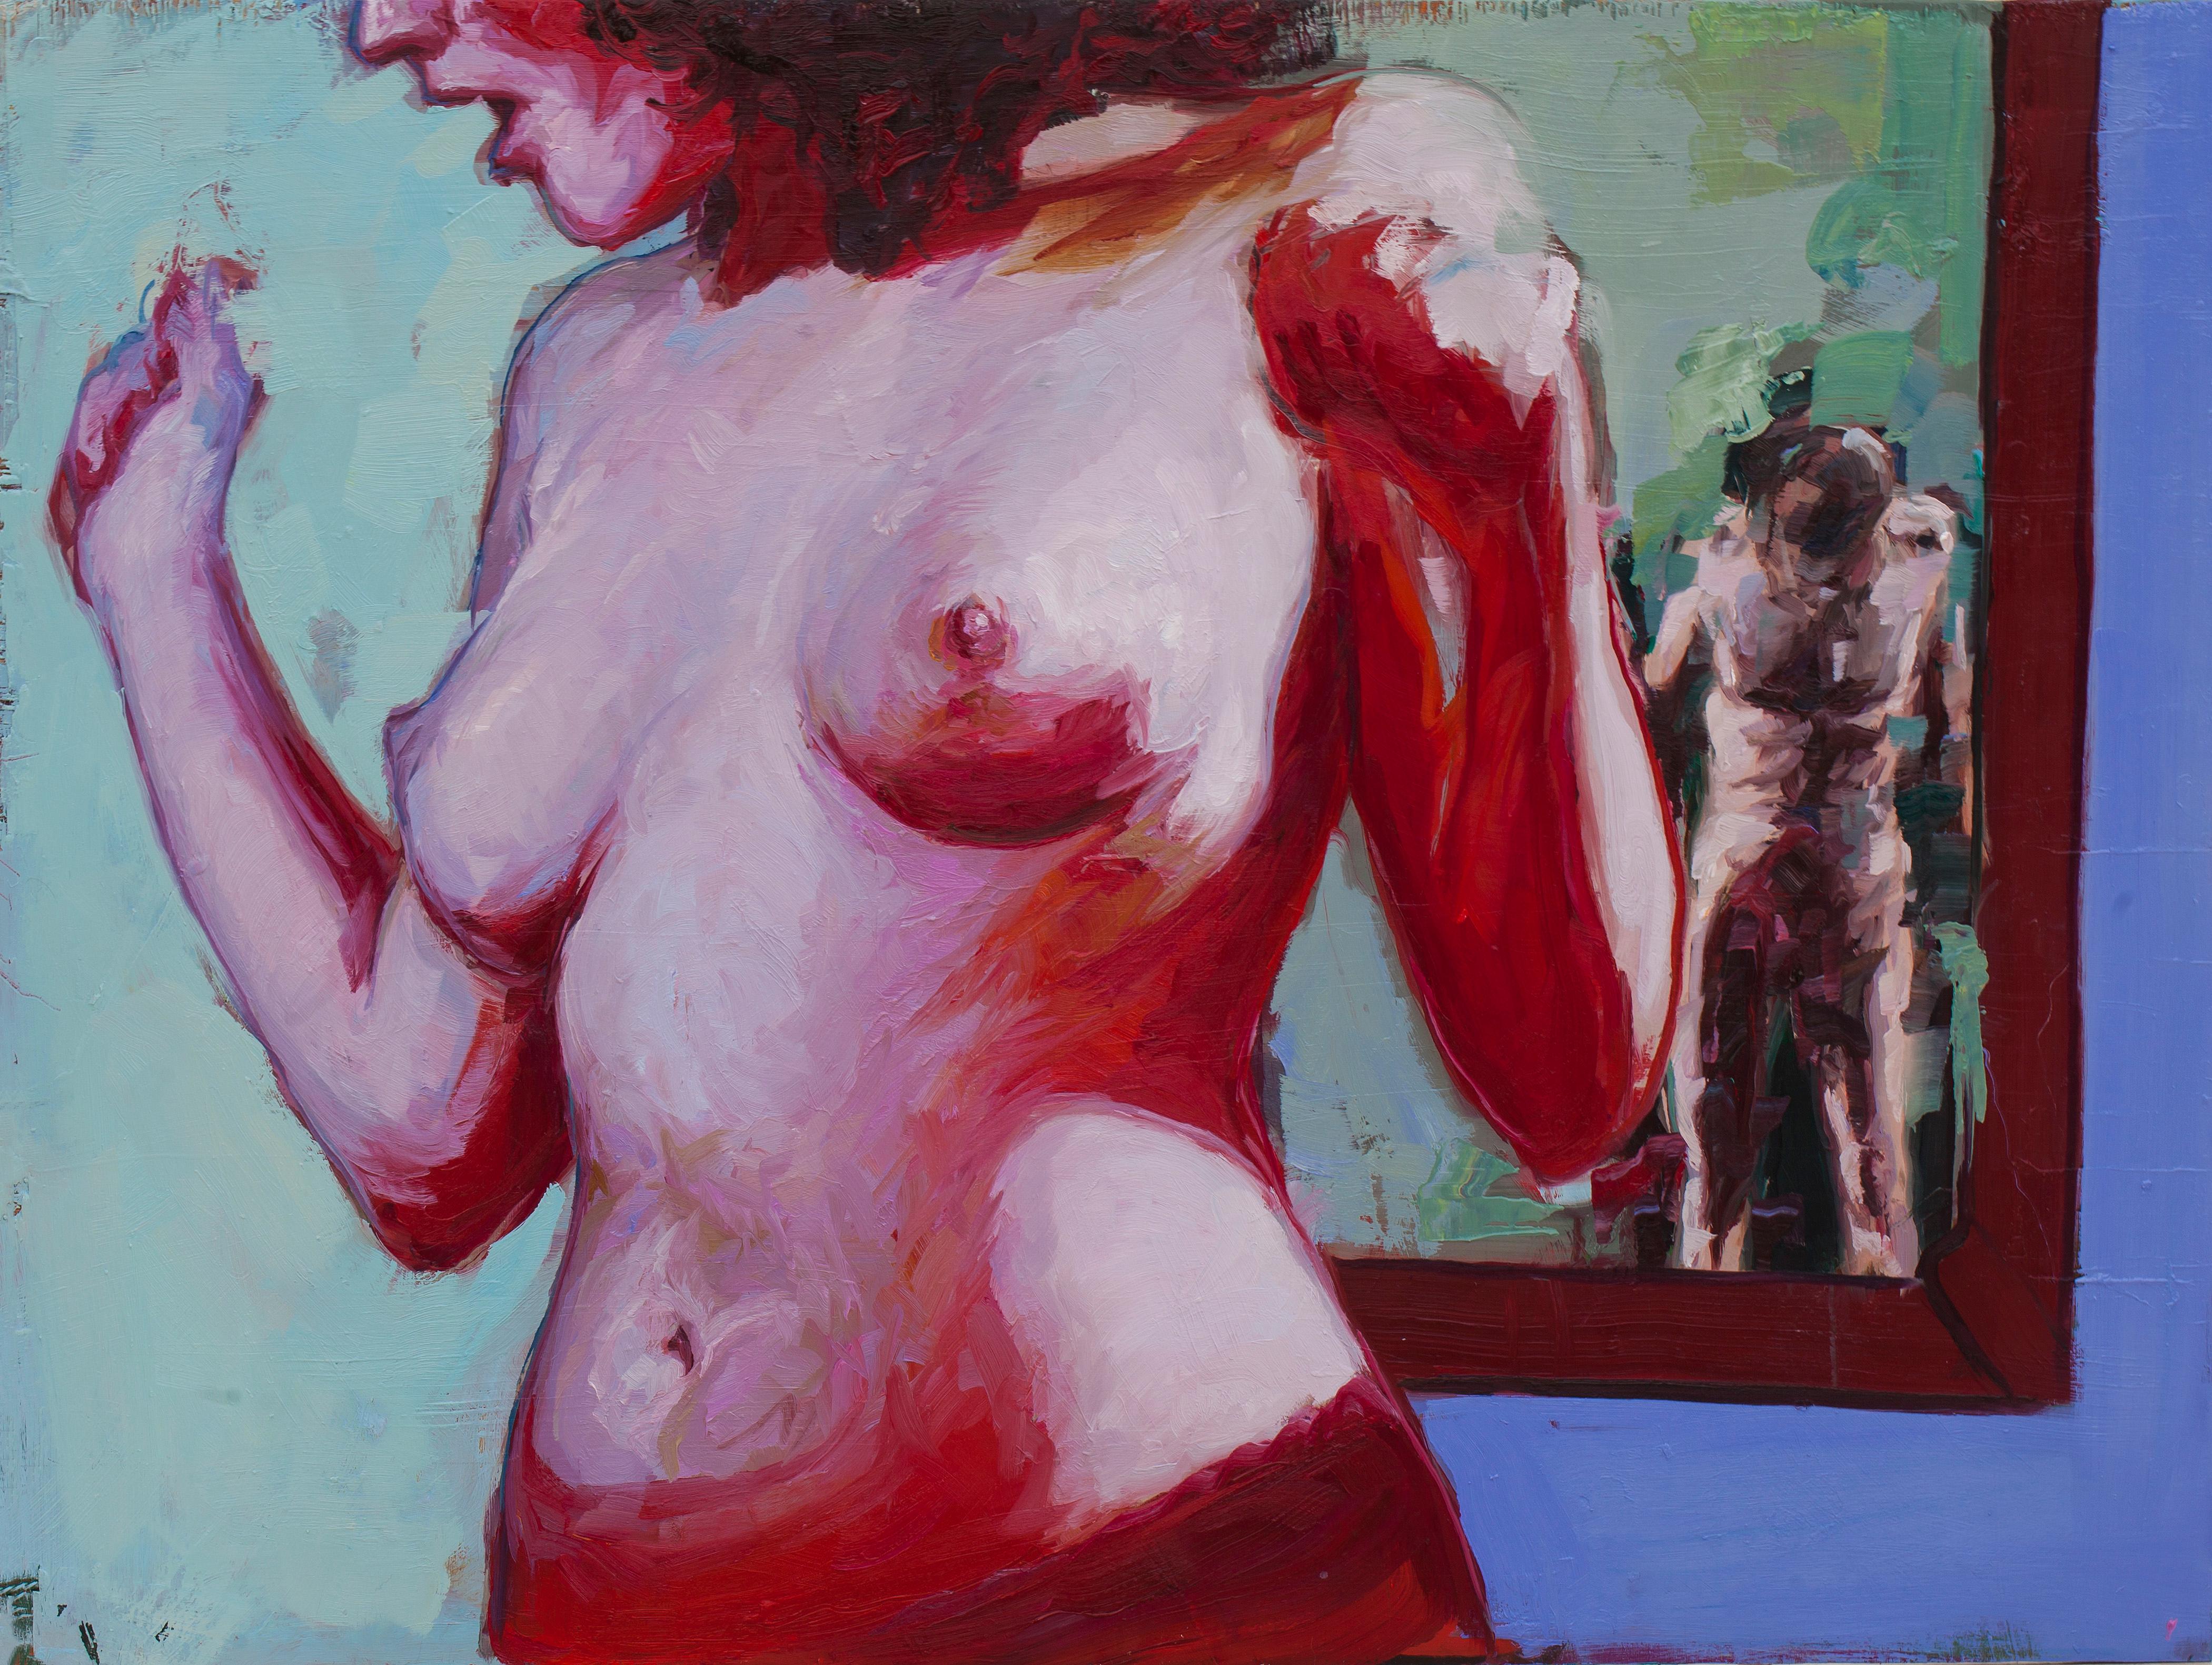 Georgia Hinaris Figurative Painting - Bloody Birthday - Female Nude, Bold Colors and Heavy Textured Paint on Panel